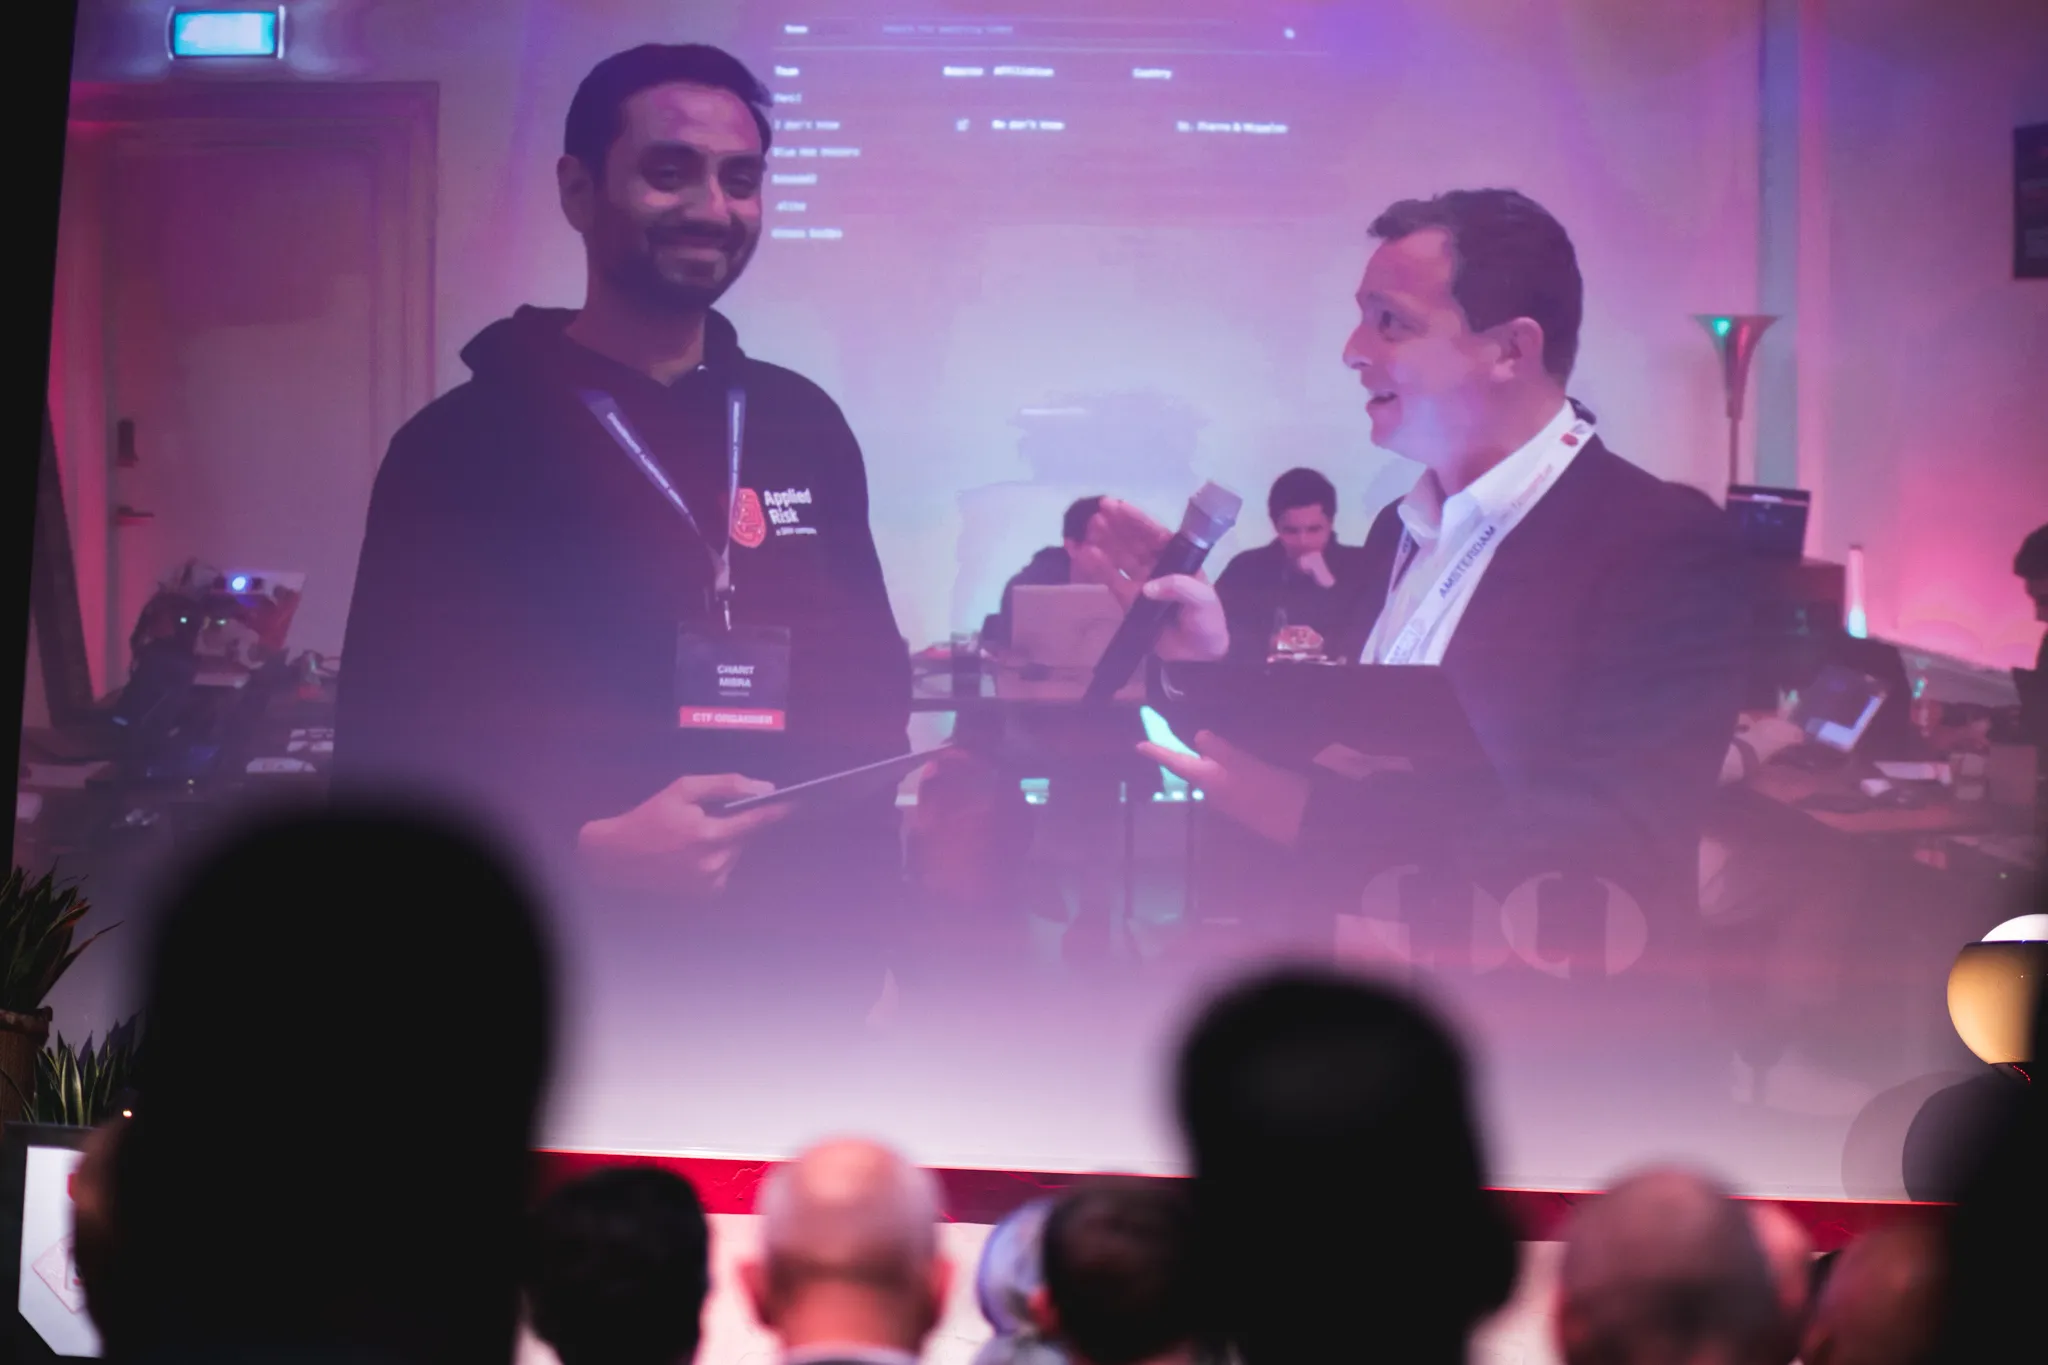 “The competition was much more realistic, advanced, difficult and specialist than many CTF competitions” Charit Misra, Principal OT Security consultant with Applied Risk